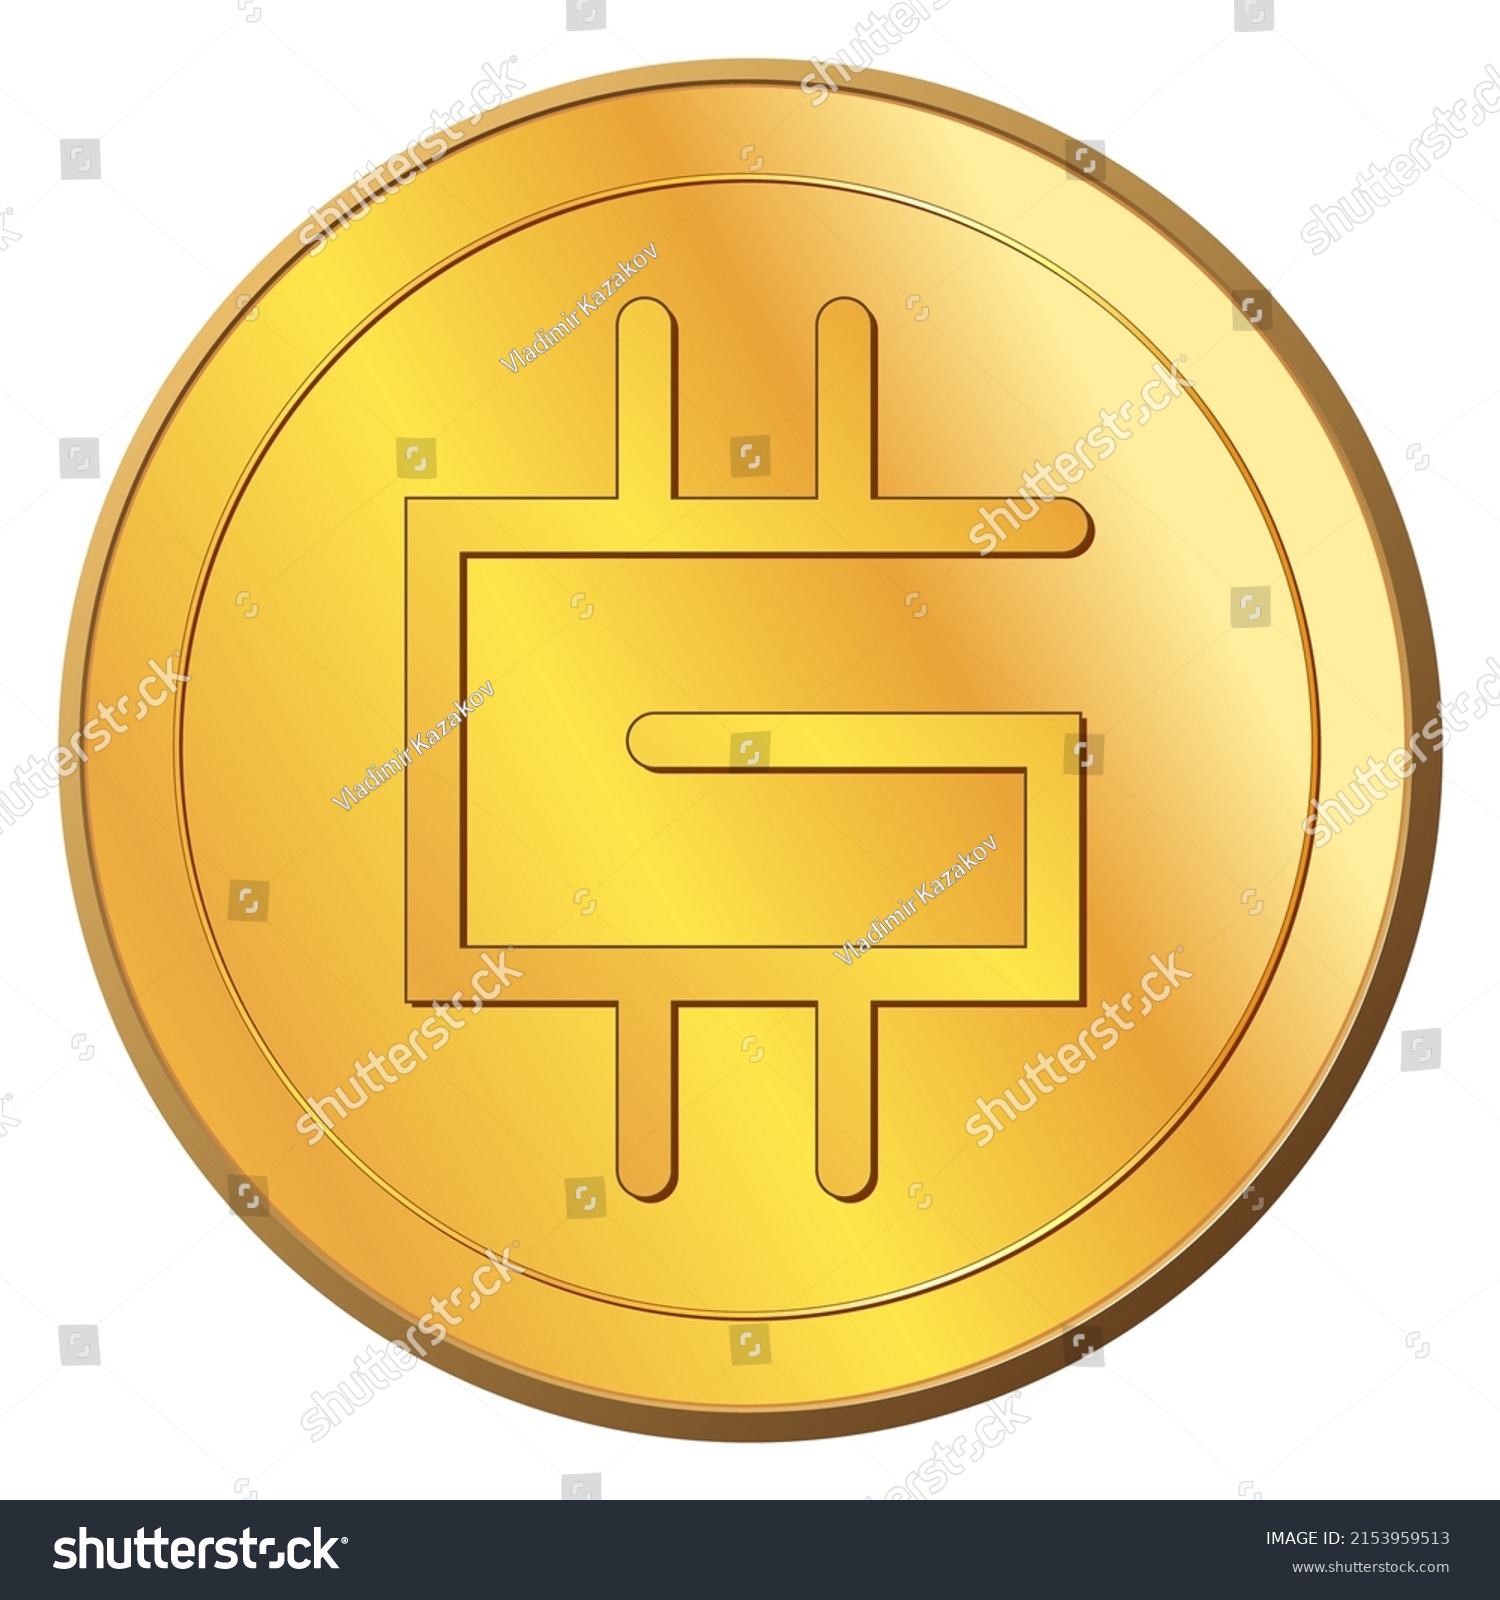 SVG of Golden coin Stepn GMT in front view isolated on white. Vector illustration. svg